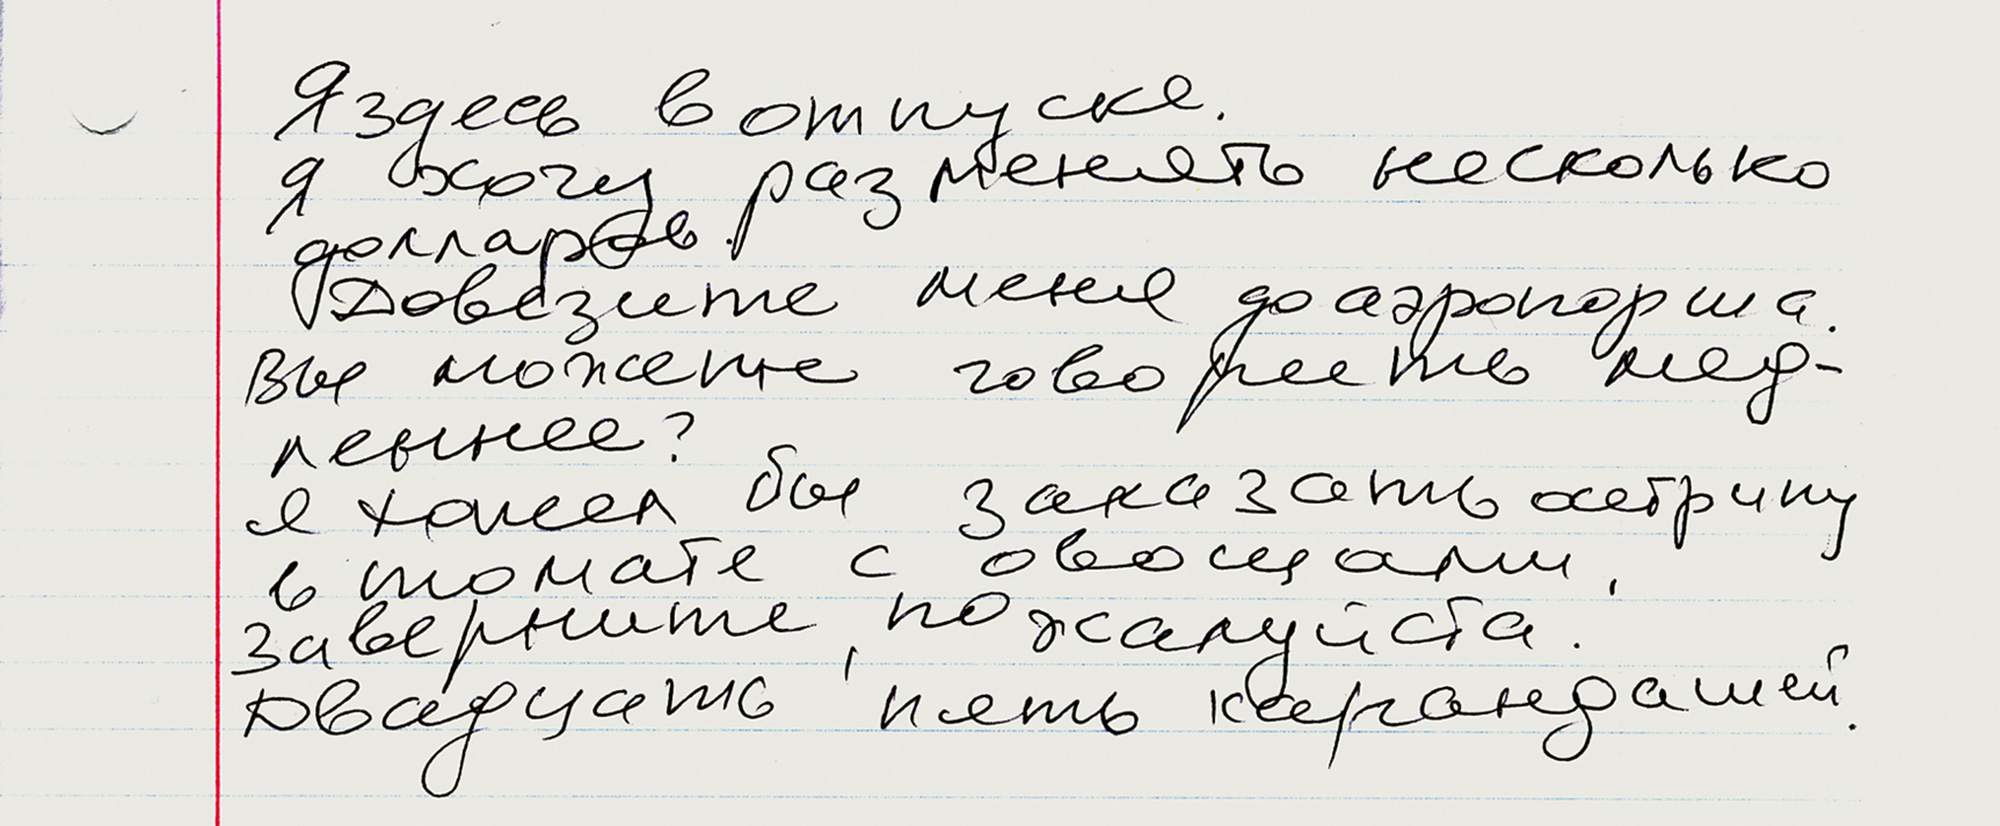 Nikita Khrushchev’s purported to-do list for 25 October nineteen sixty-two.